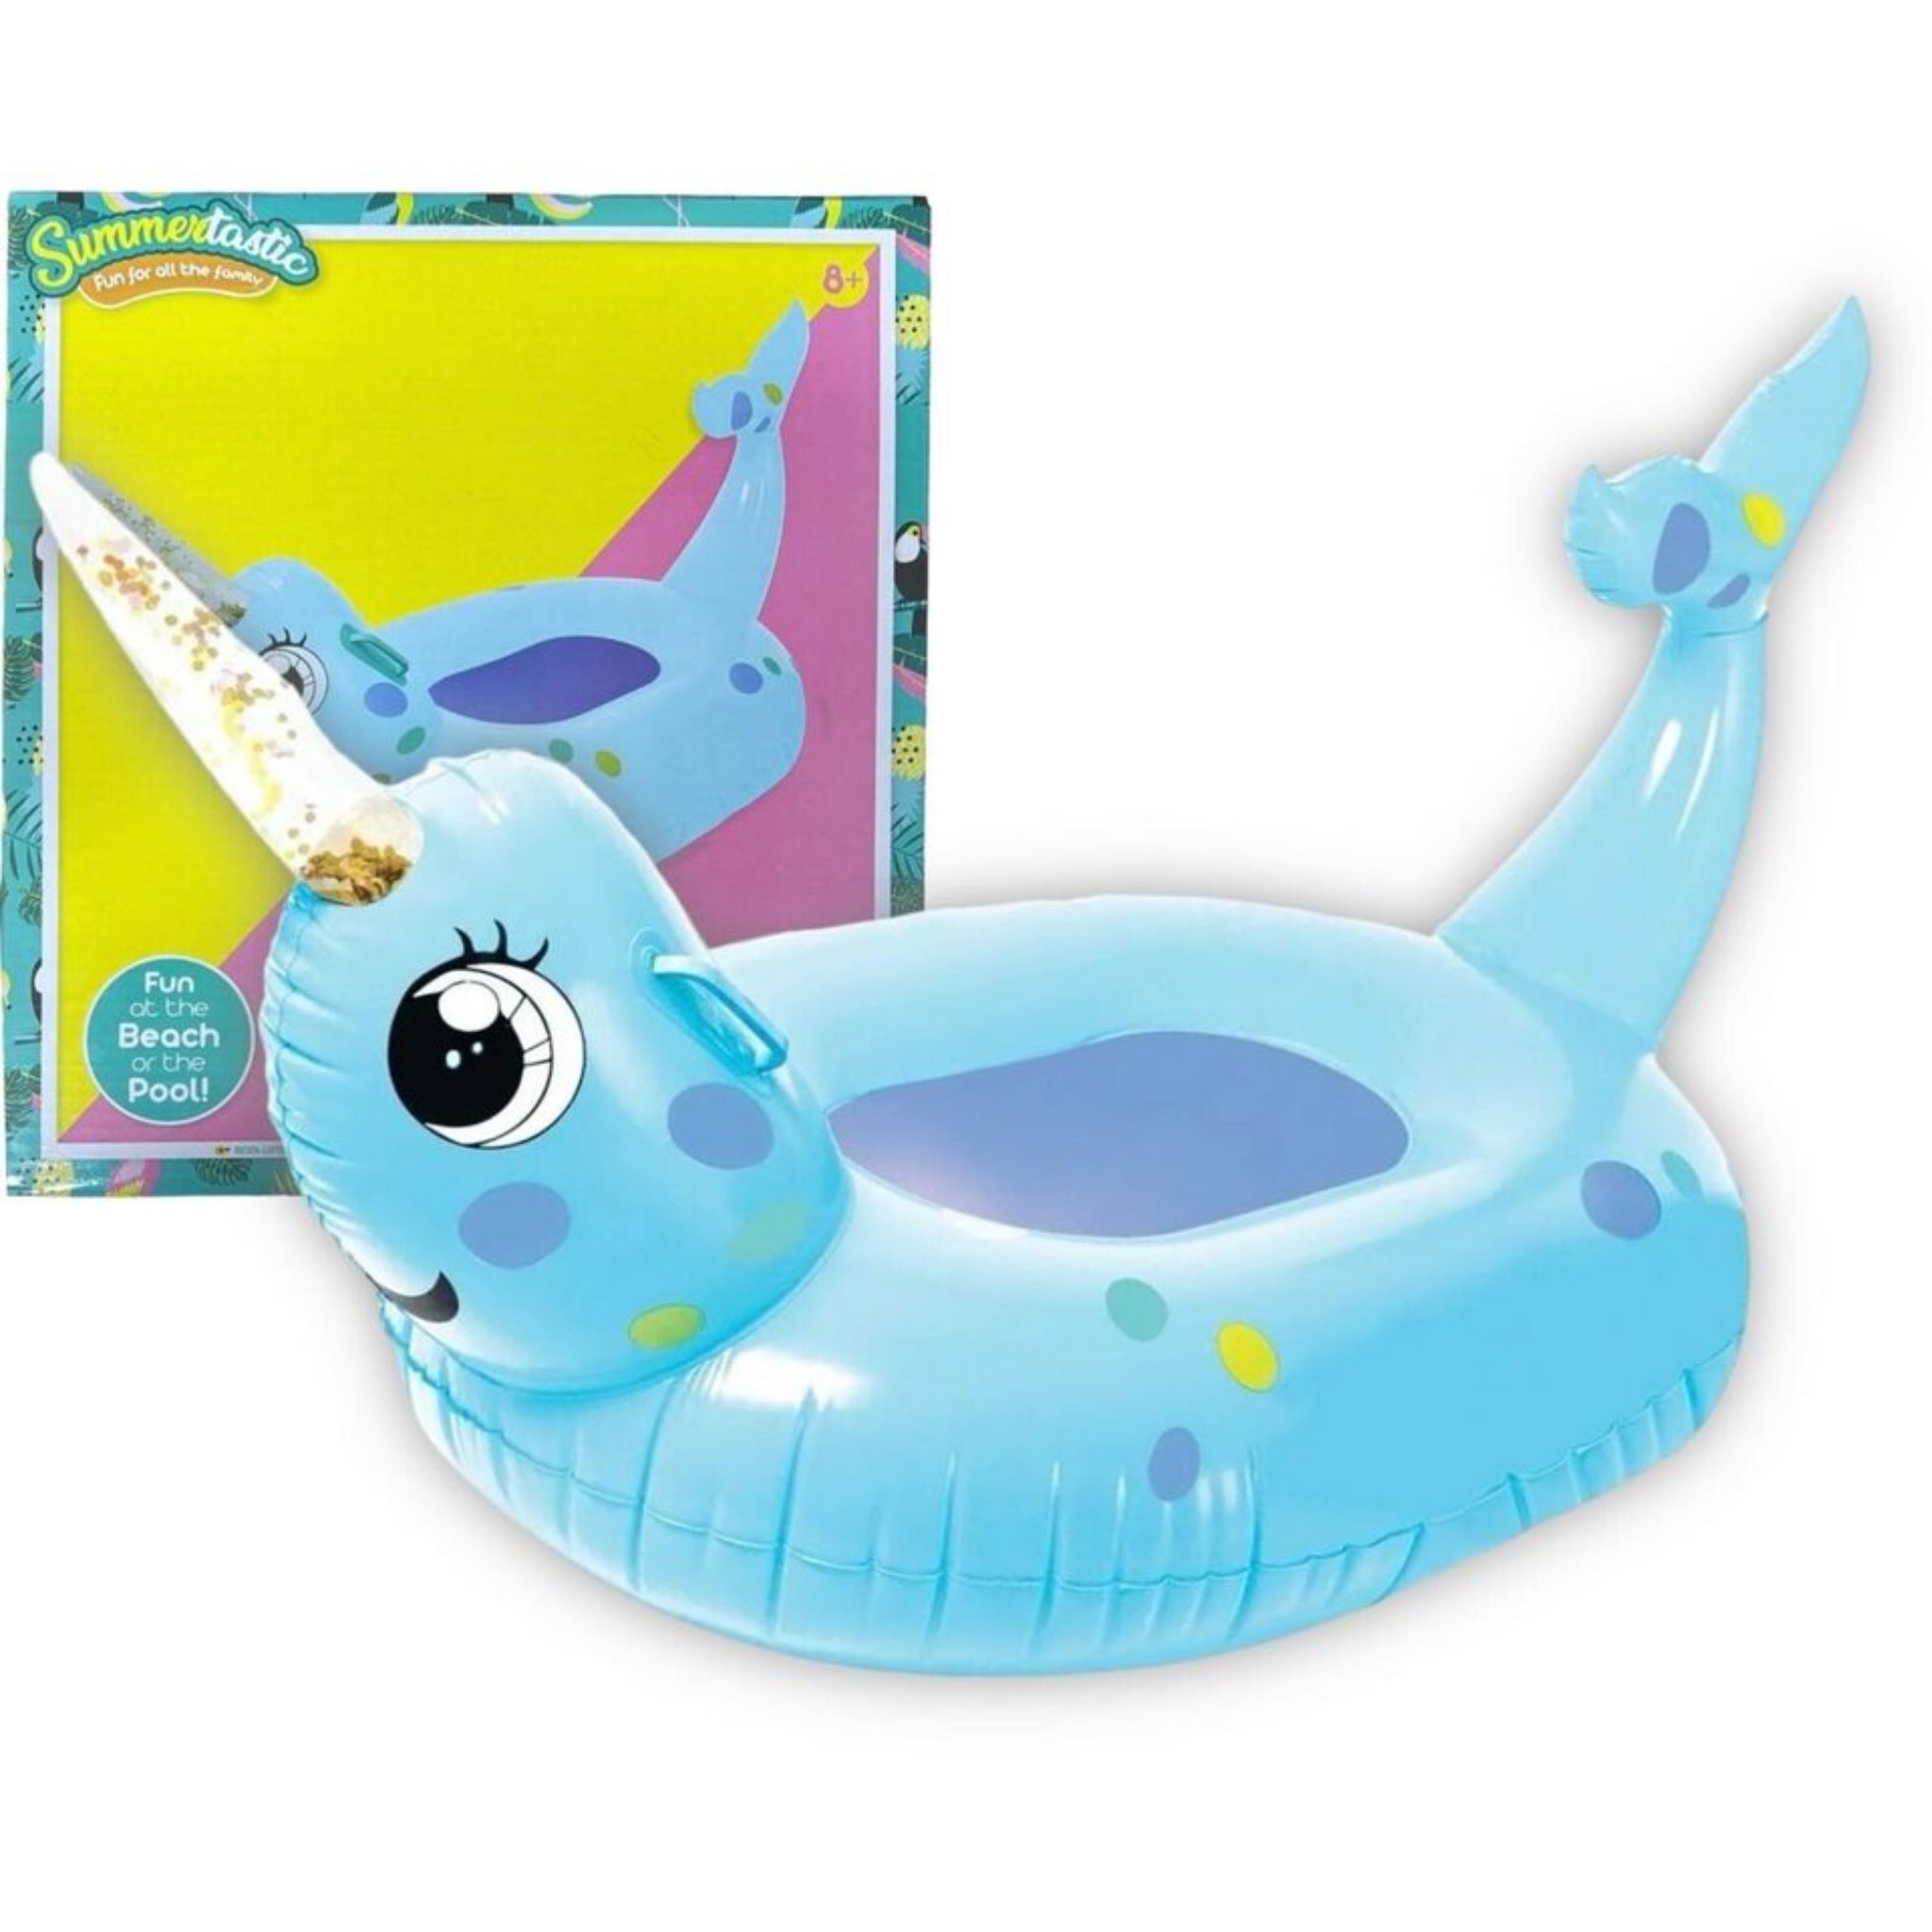 Beclen Harp Inflatable Float Narwhal Glitter Water Pool Lounger Float Holiday Pool Fun Float Beach Pool 105CM